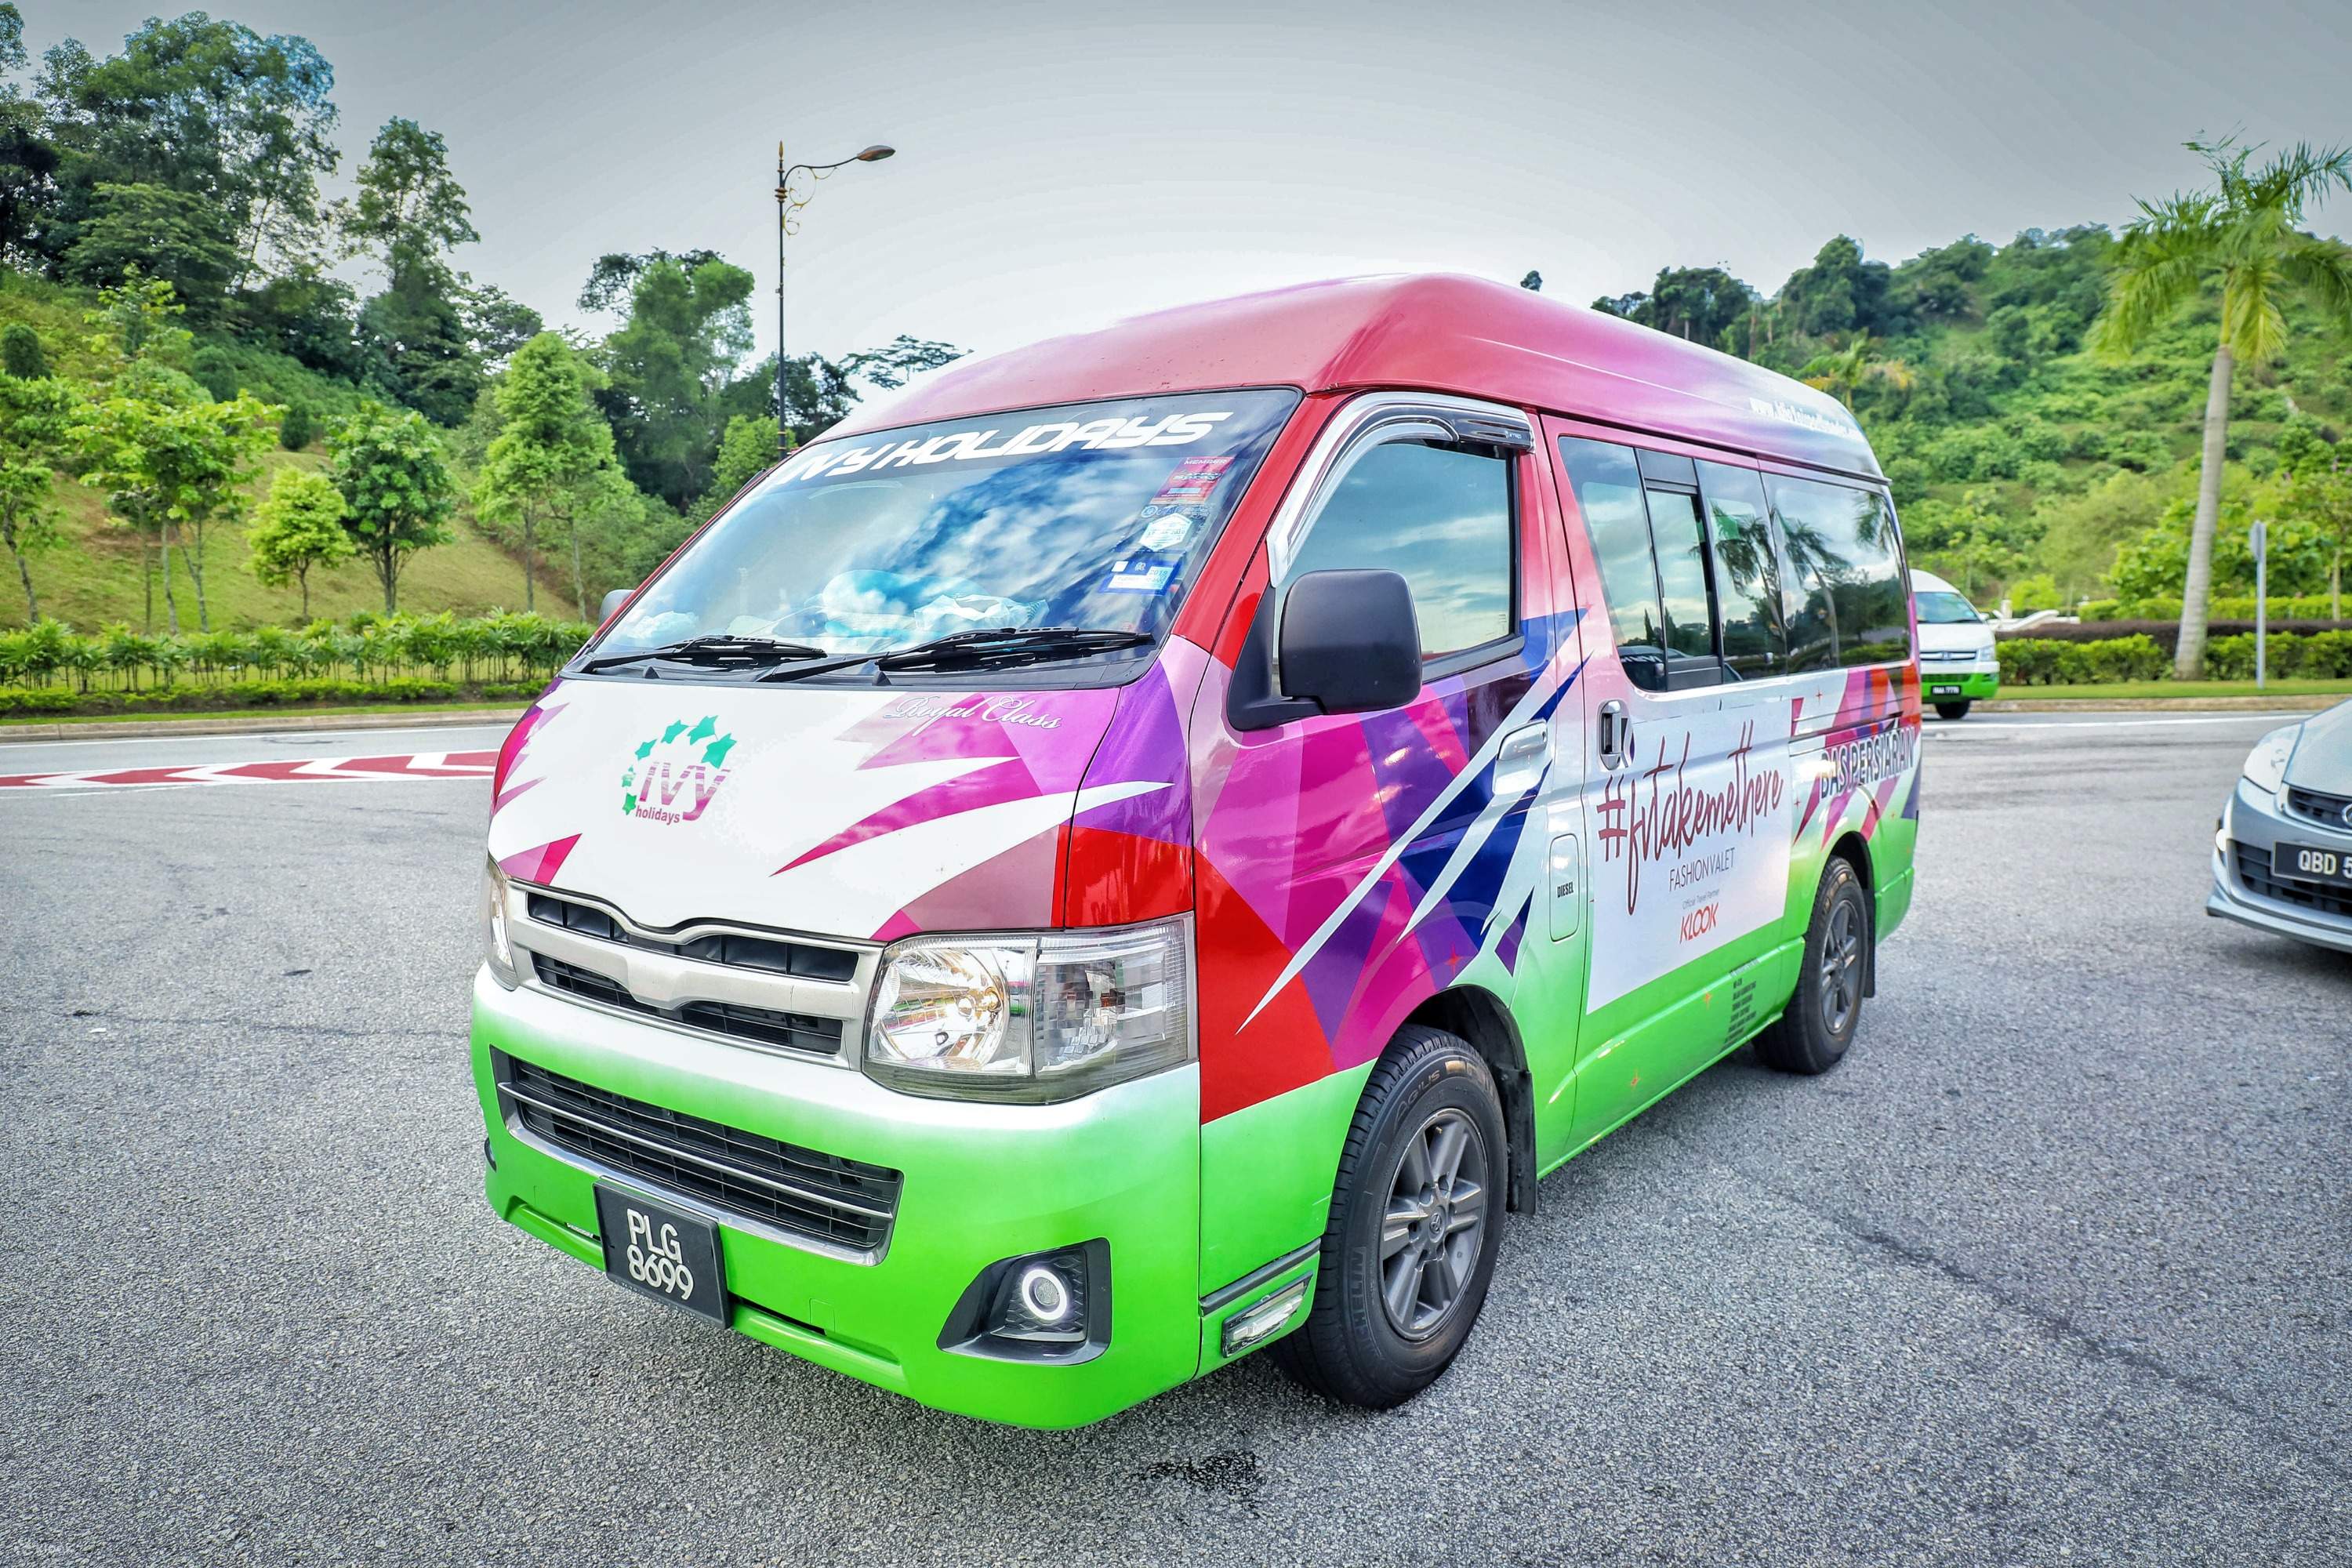 Klook Exclusive Shuttle Bus from Singapore to Johor Premium Outlets in  Malaysia - Klook